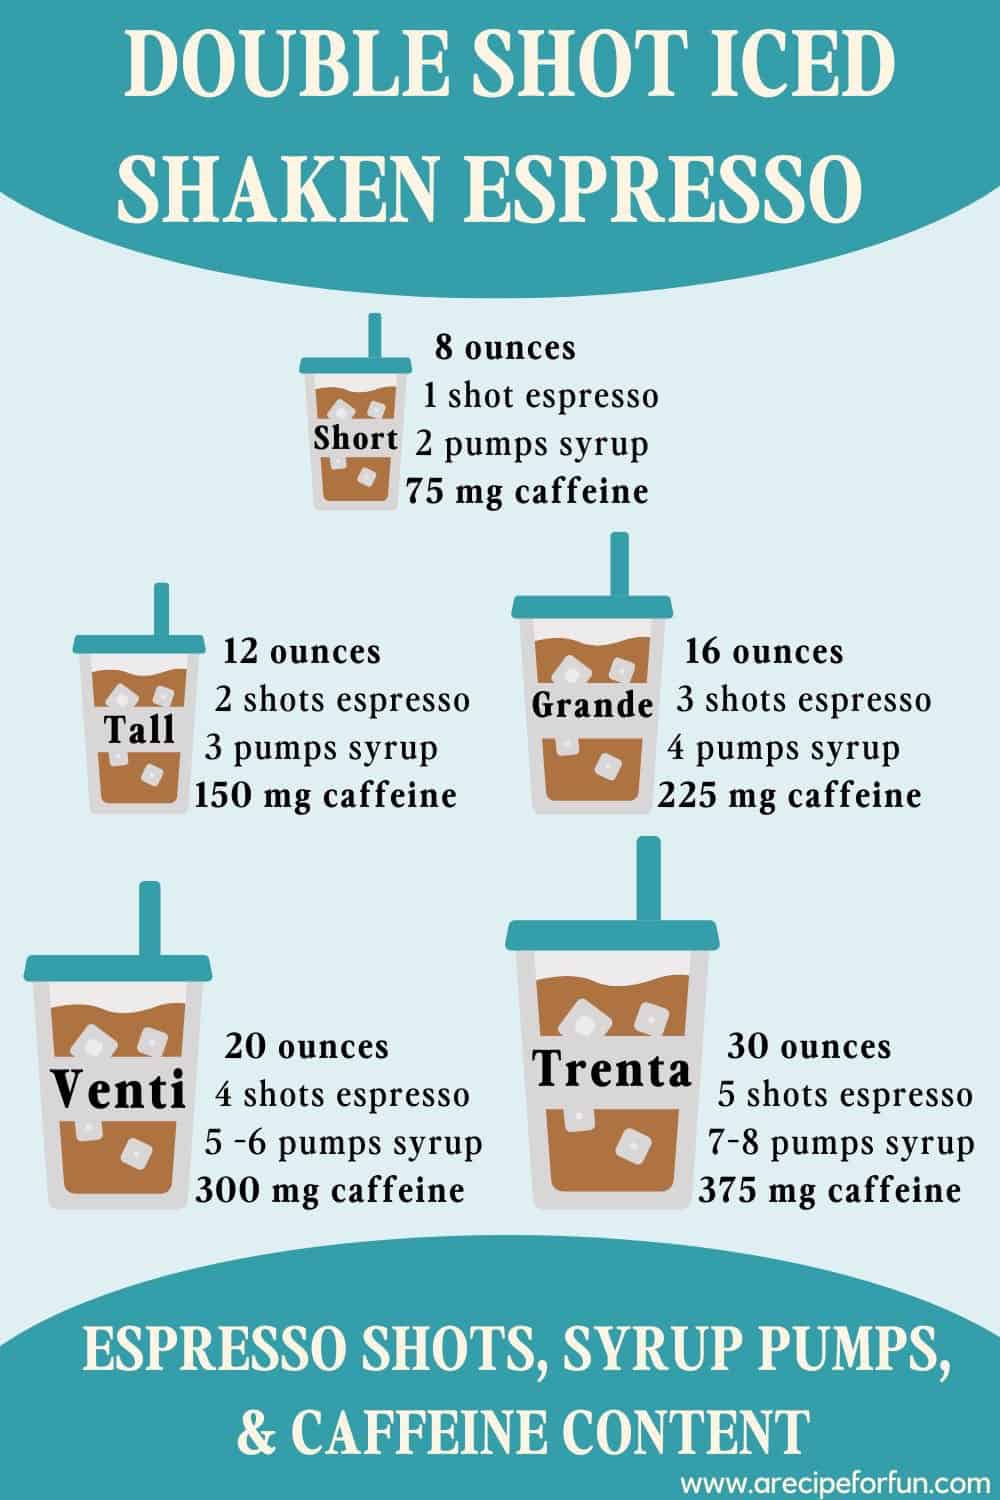 infographic sharing sizes of Starbucks double shot iced shaken espressos. The image includes information on ounces, caffeine content, pumps of syrup, and shots of espresso.